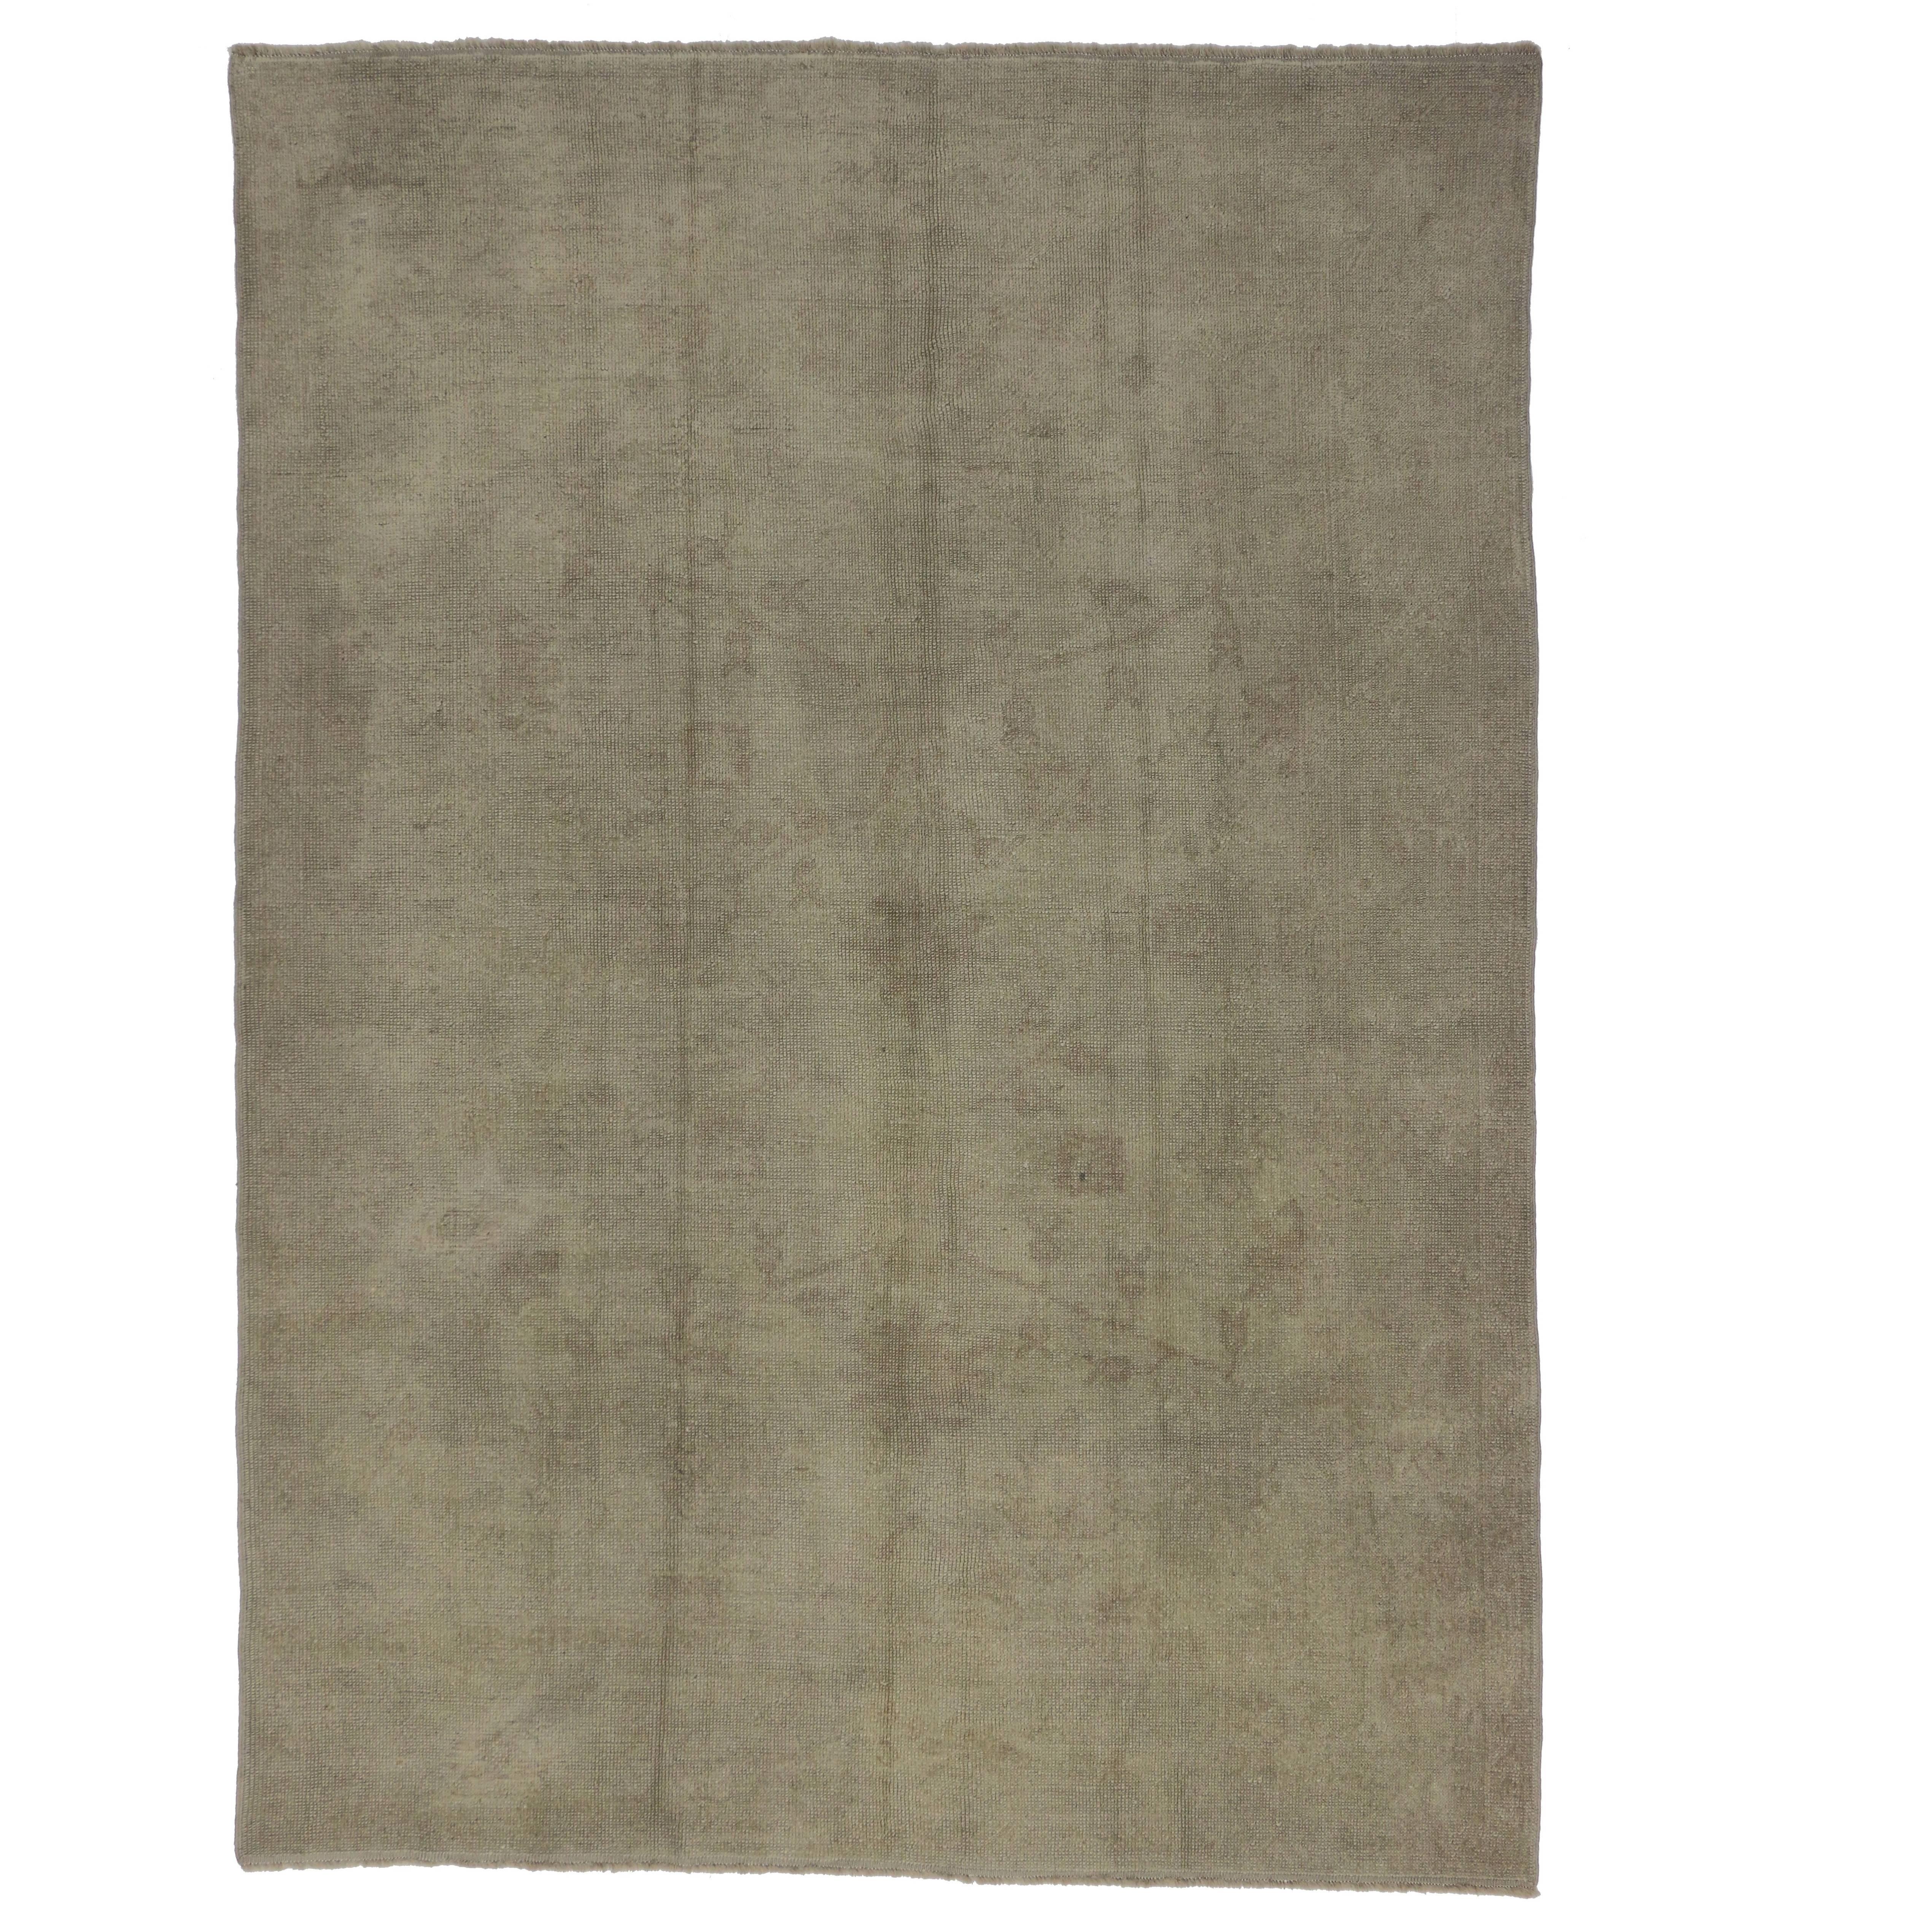 Modern Turkish Oushak Rug with Minimalist Style and Muted Colors